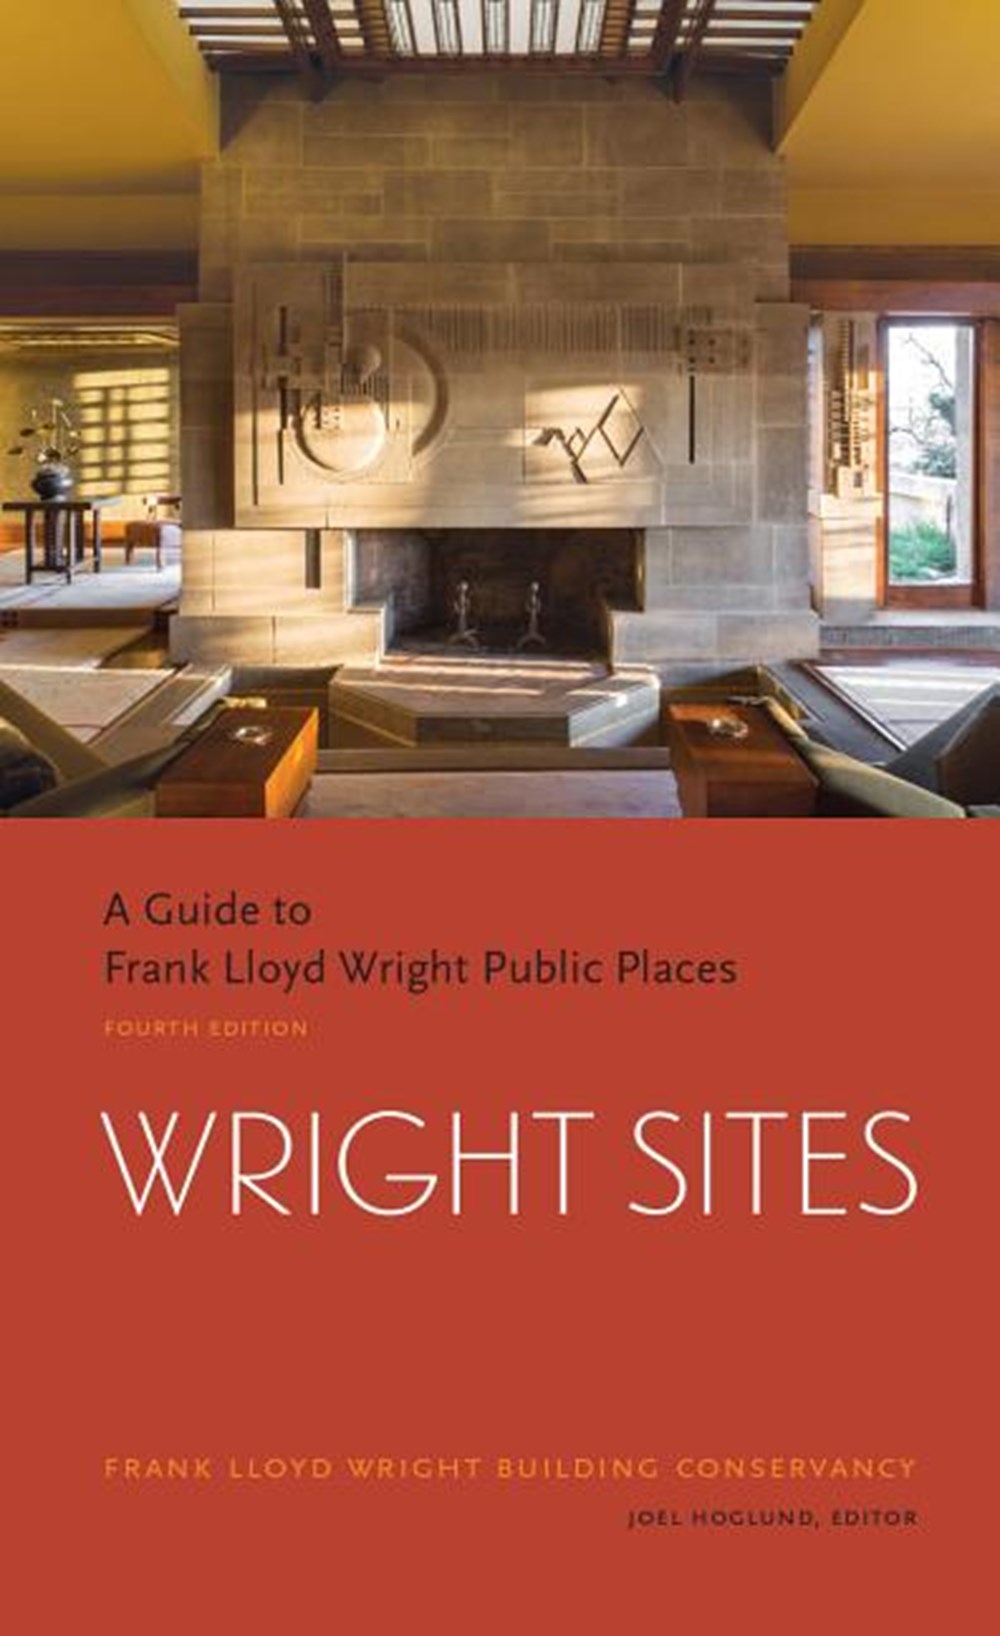 Wright Sites: A Guide to Frank Lloyd Wright Public Places (Field Guide to Frank Lloyd Wright Houses 